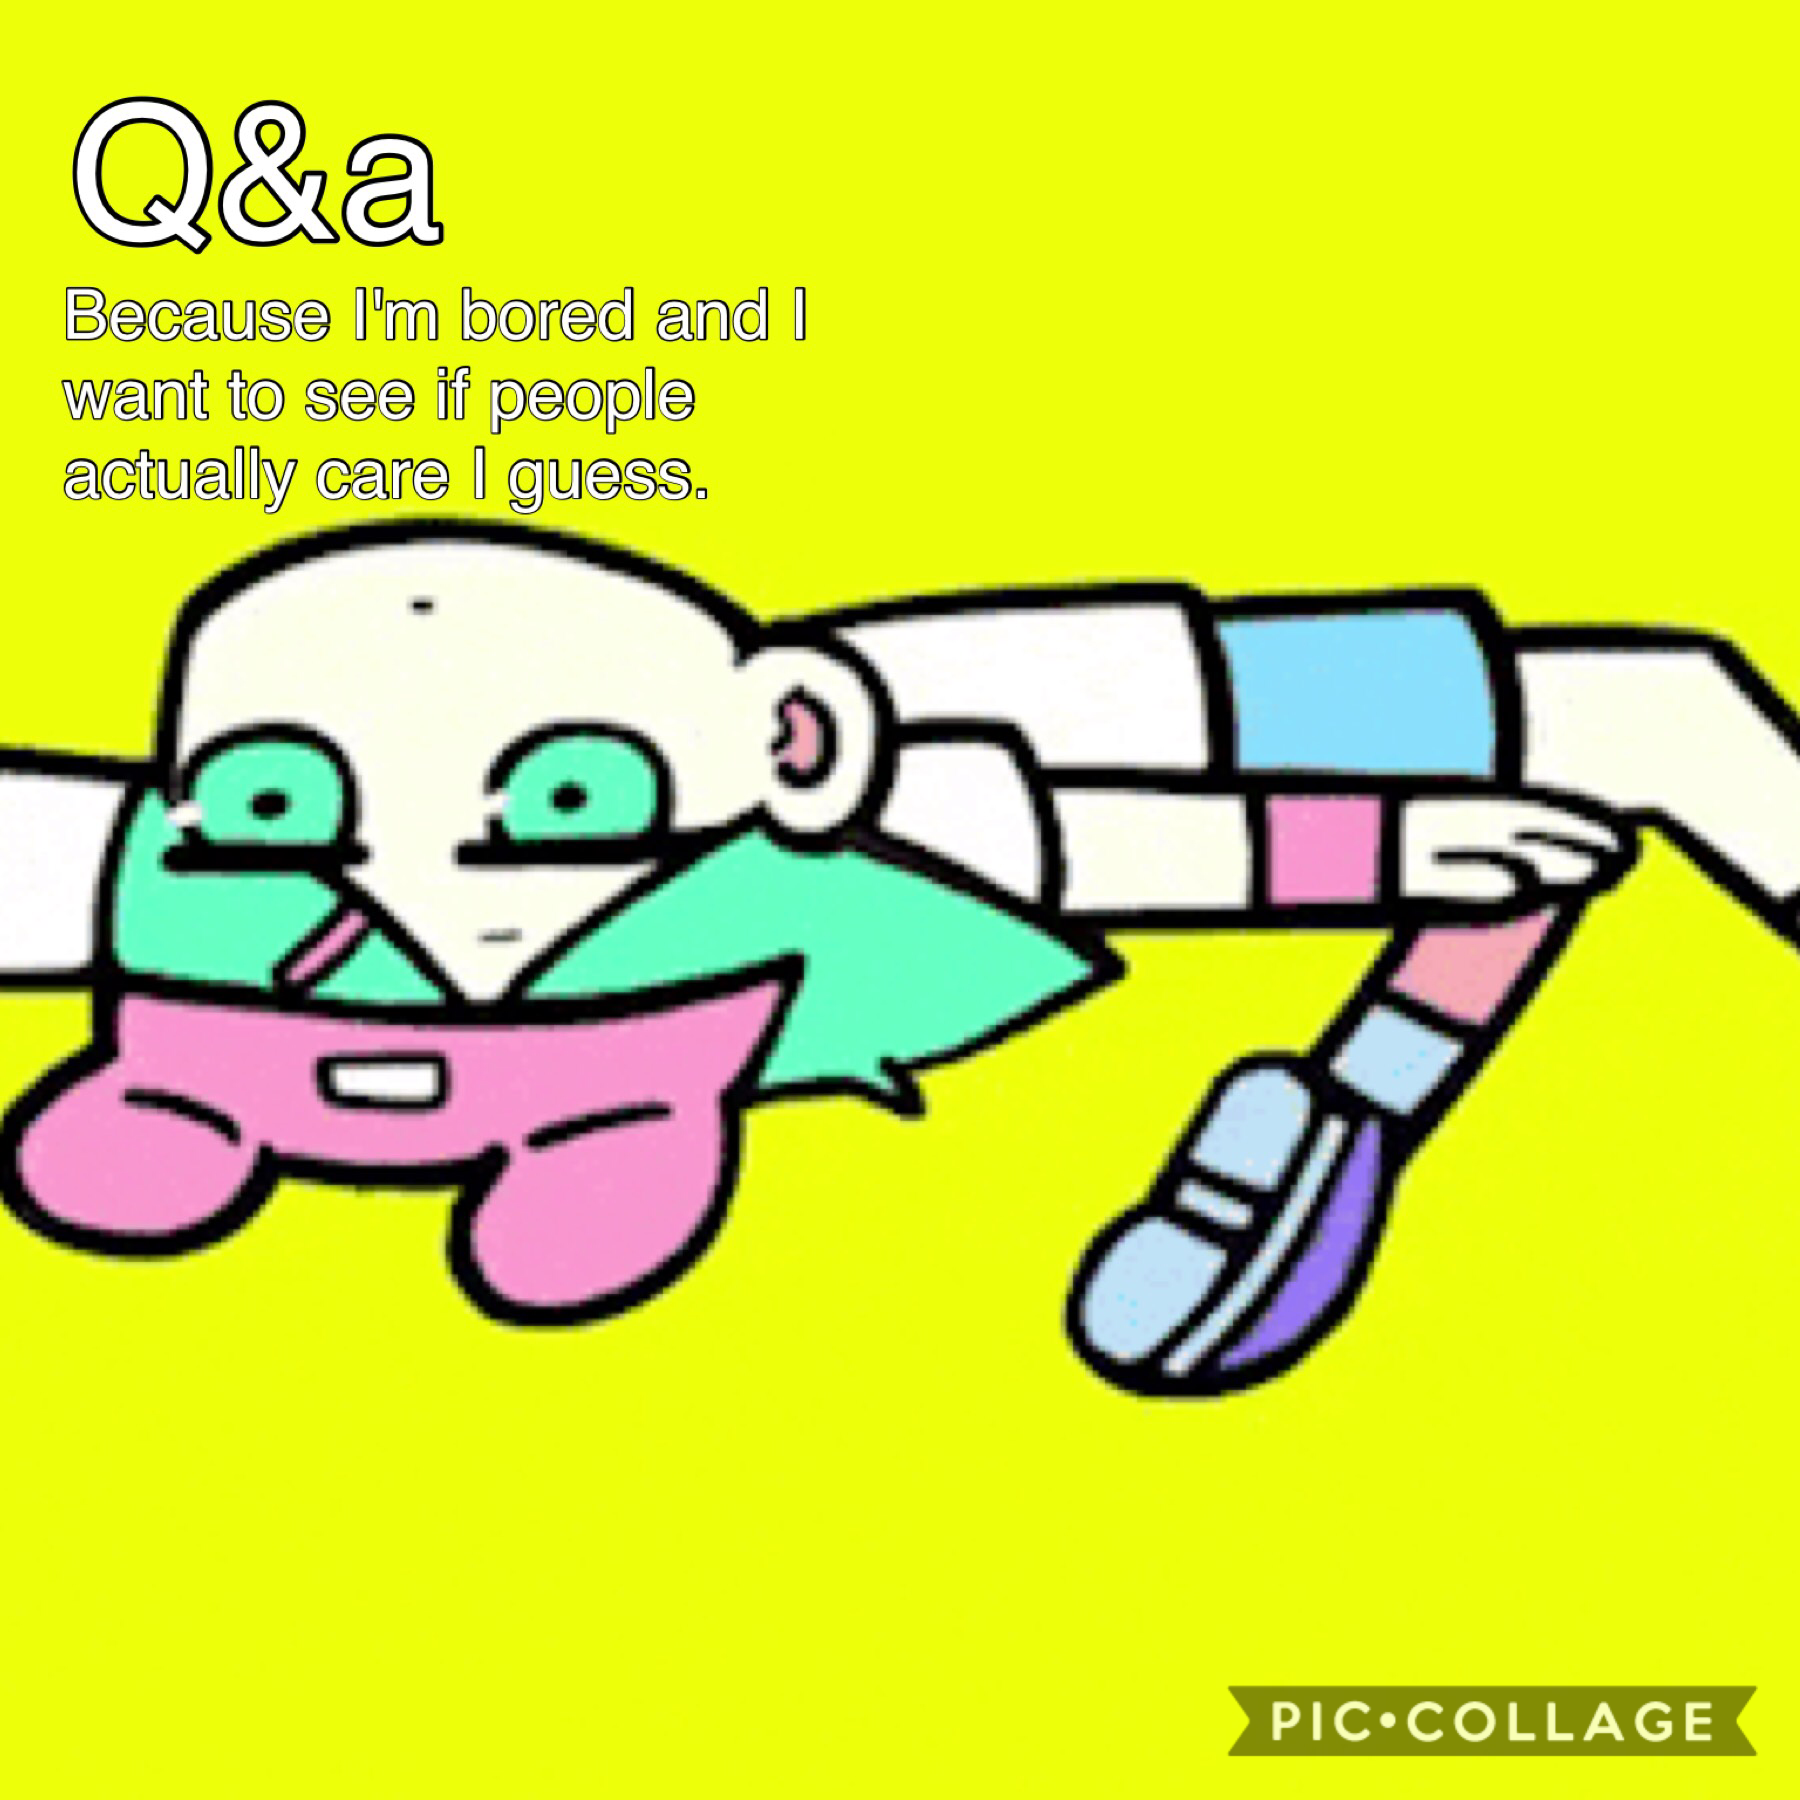 Also im jealous that my q&a's never get any questions I guess